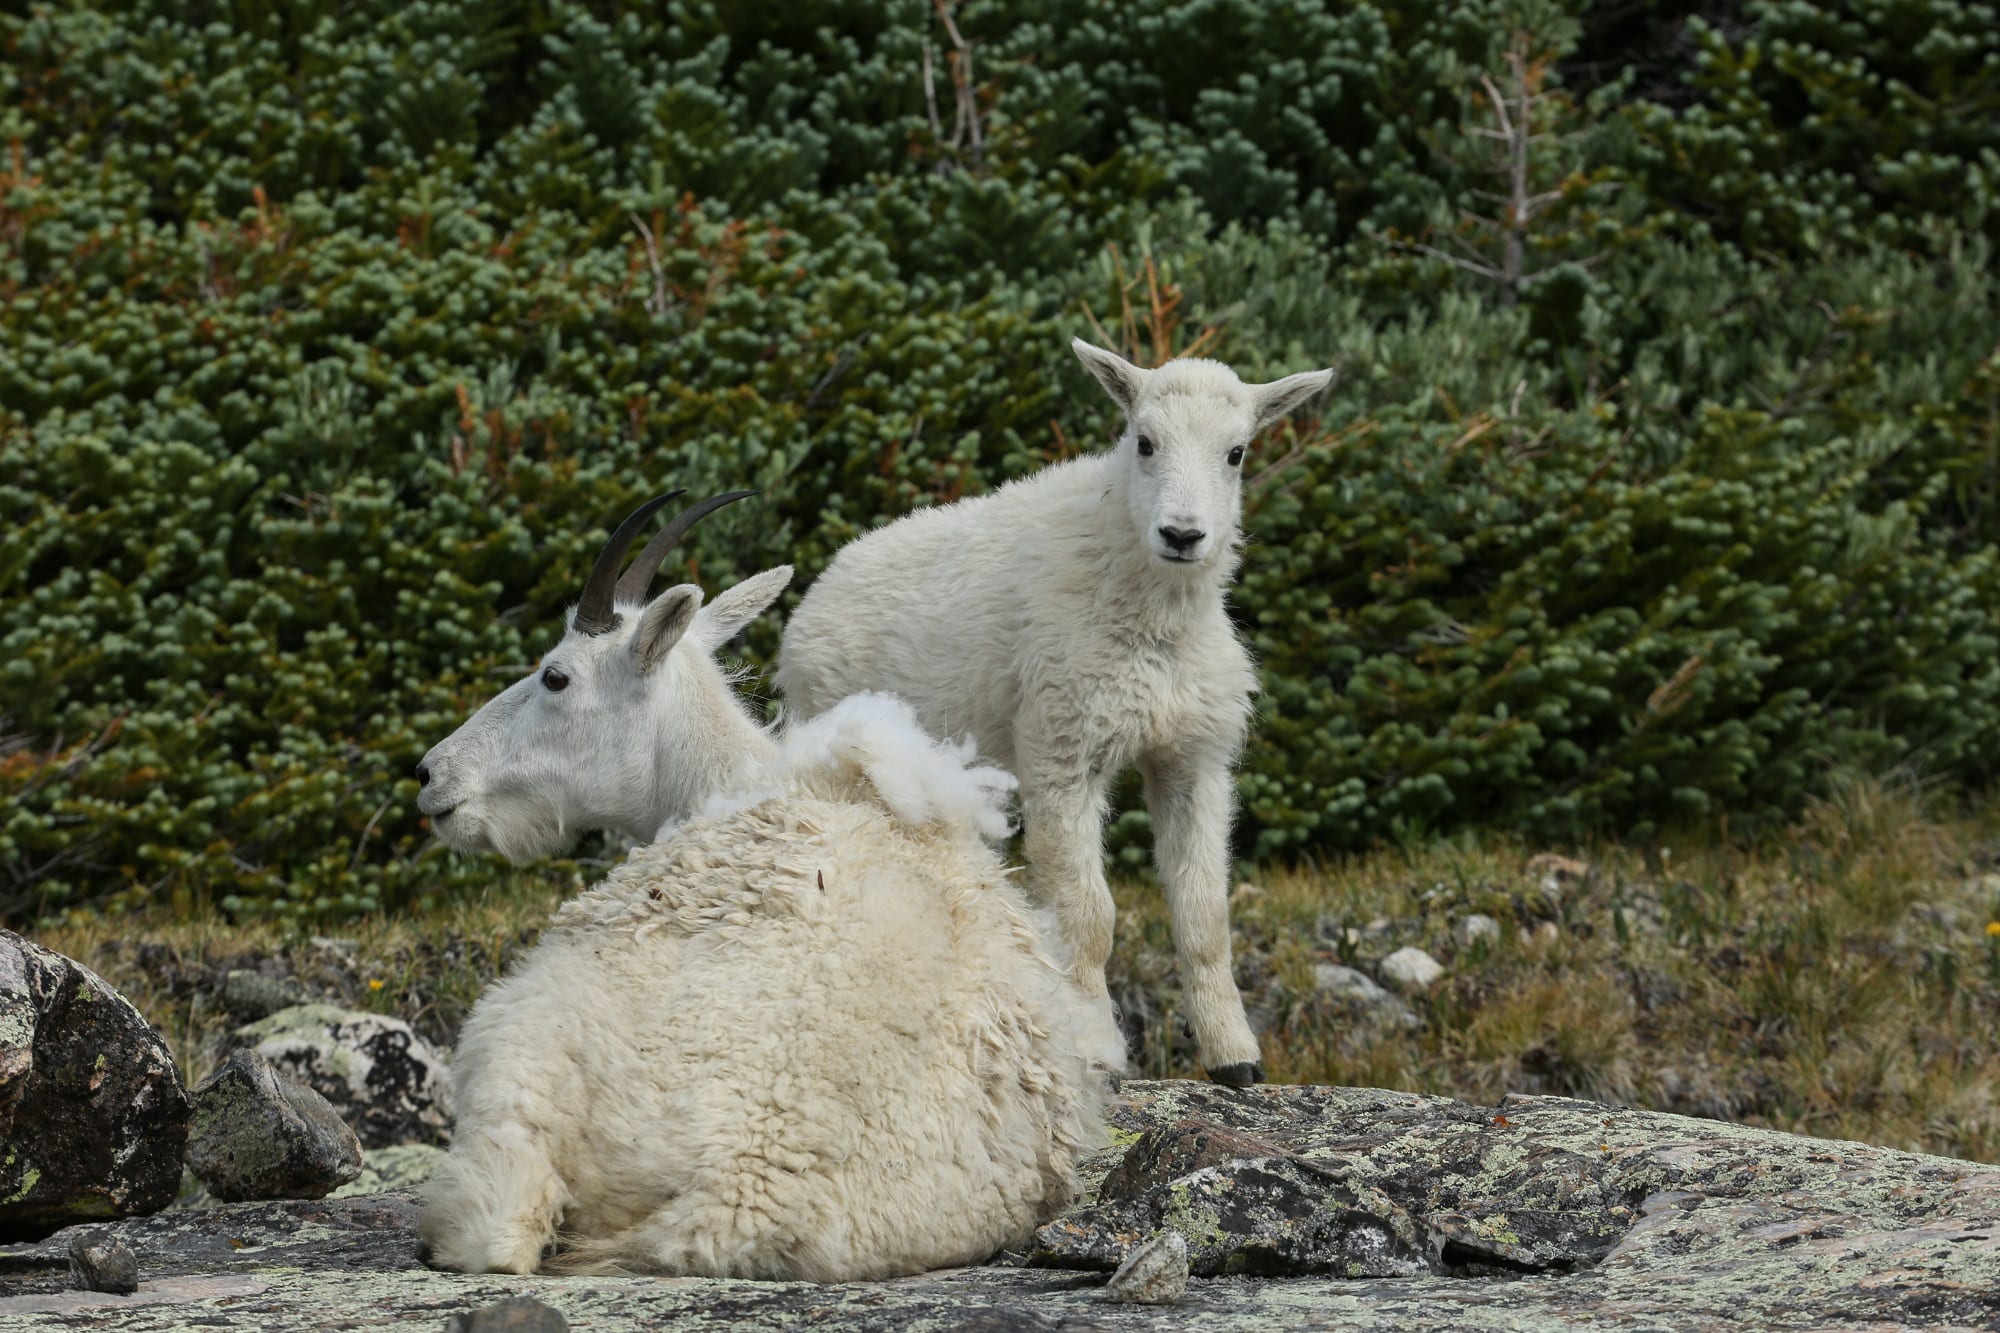 Mountain goats shedding their undercoats in the summer.